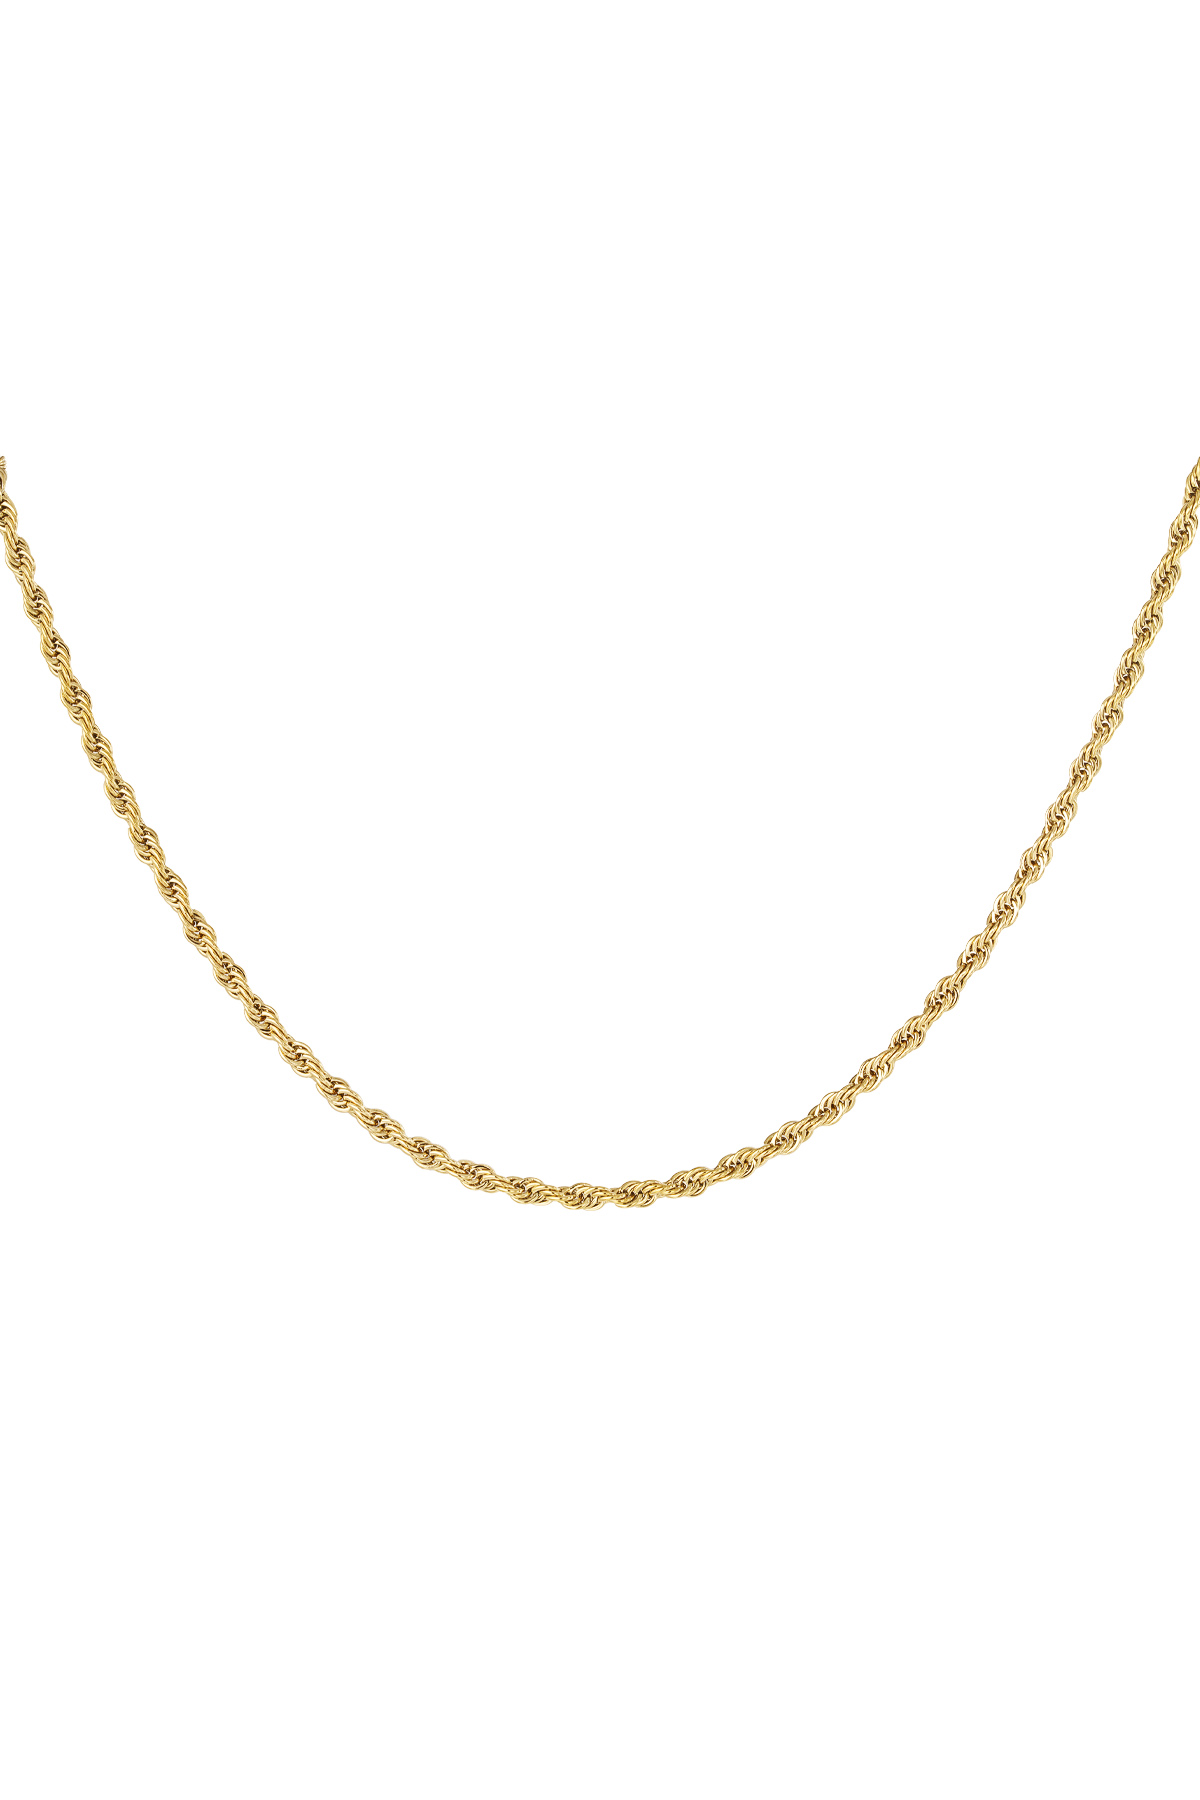 Unisex necklace twisted short - gold-3.0MM h5 